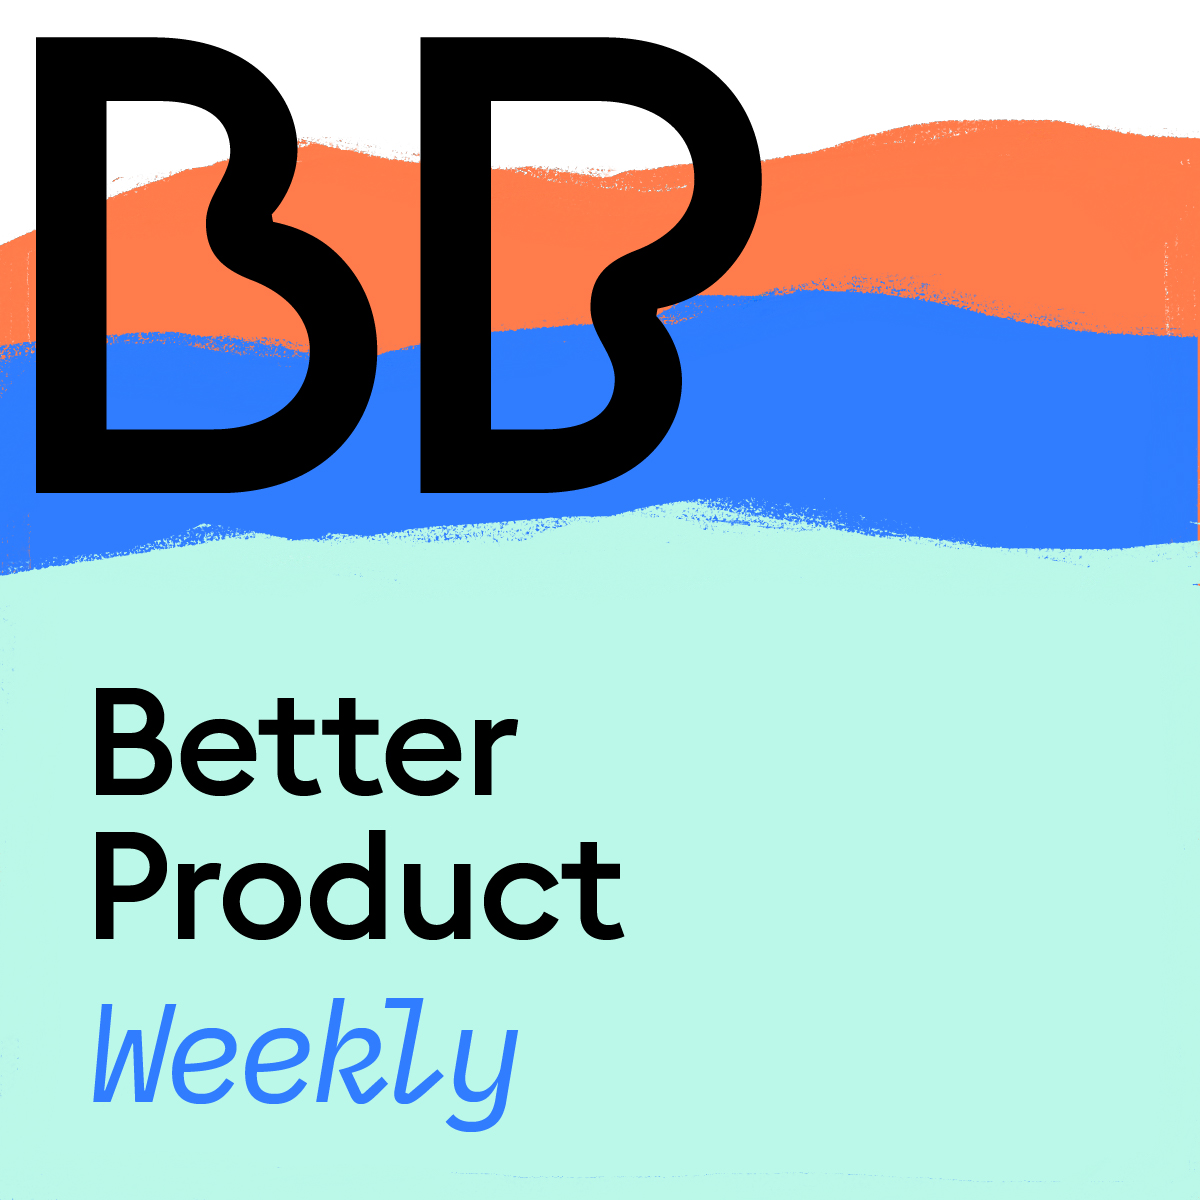 Better Product Weekly